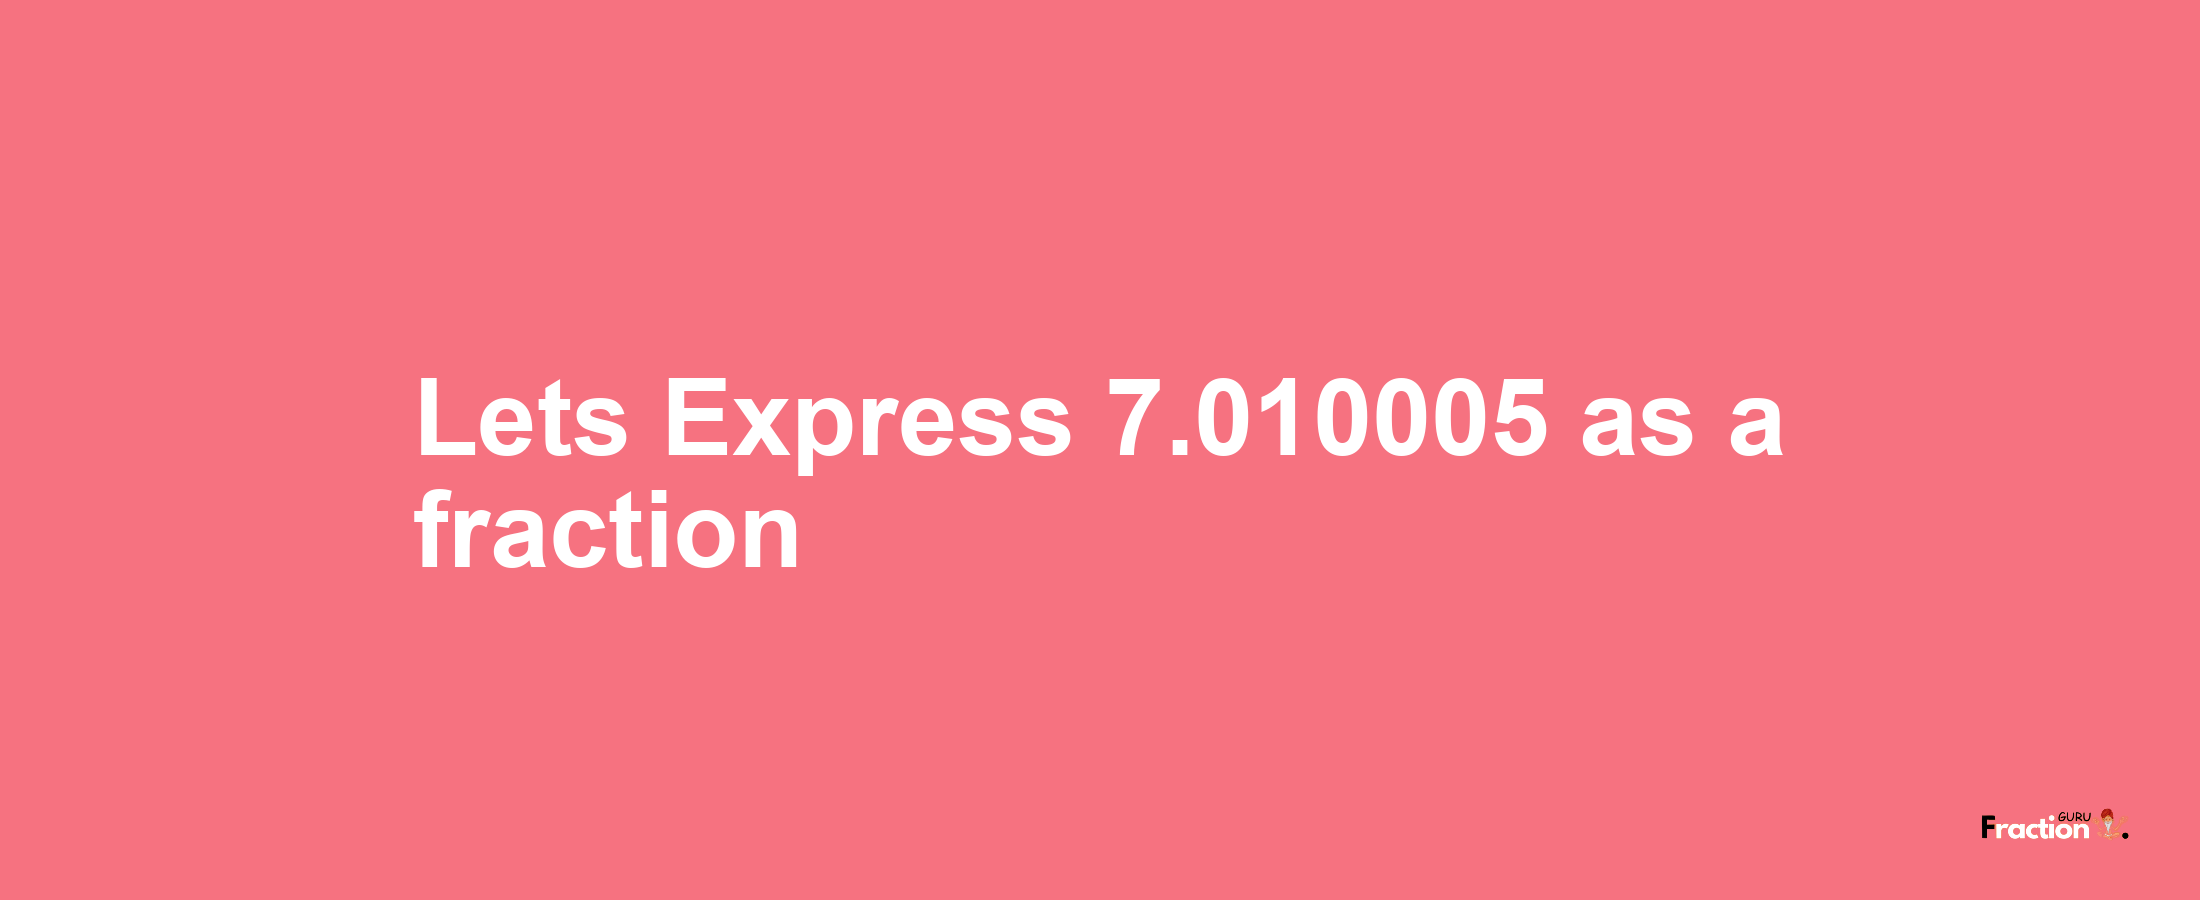 Lets Express 7.010005 as afraction